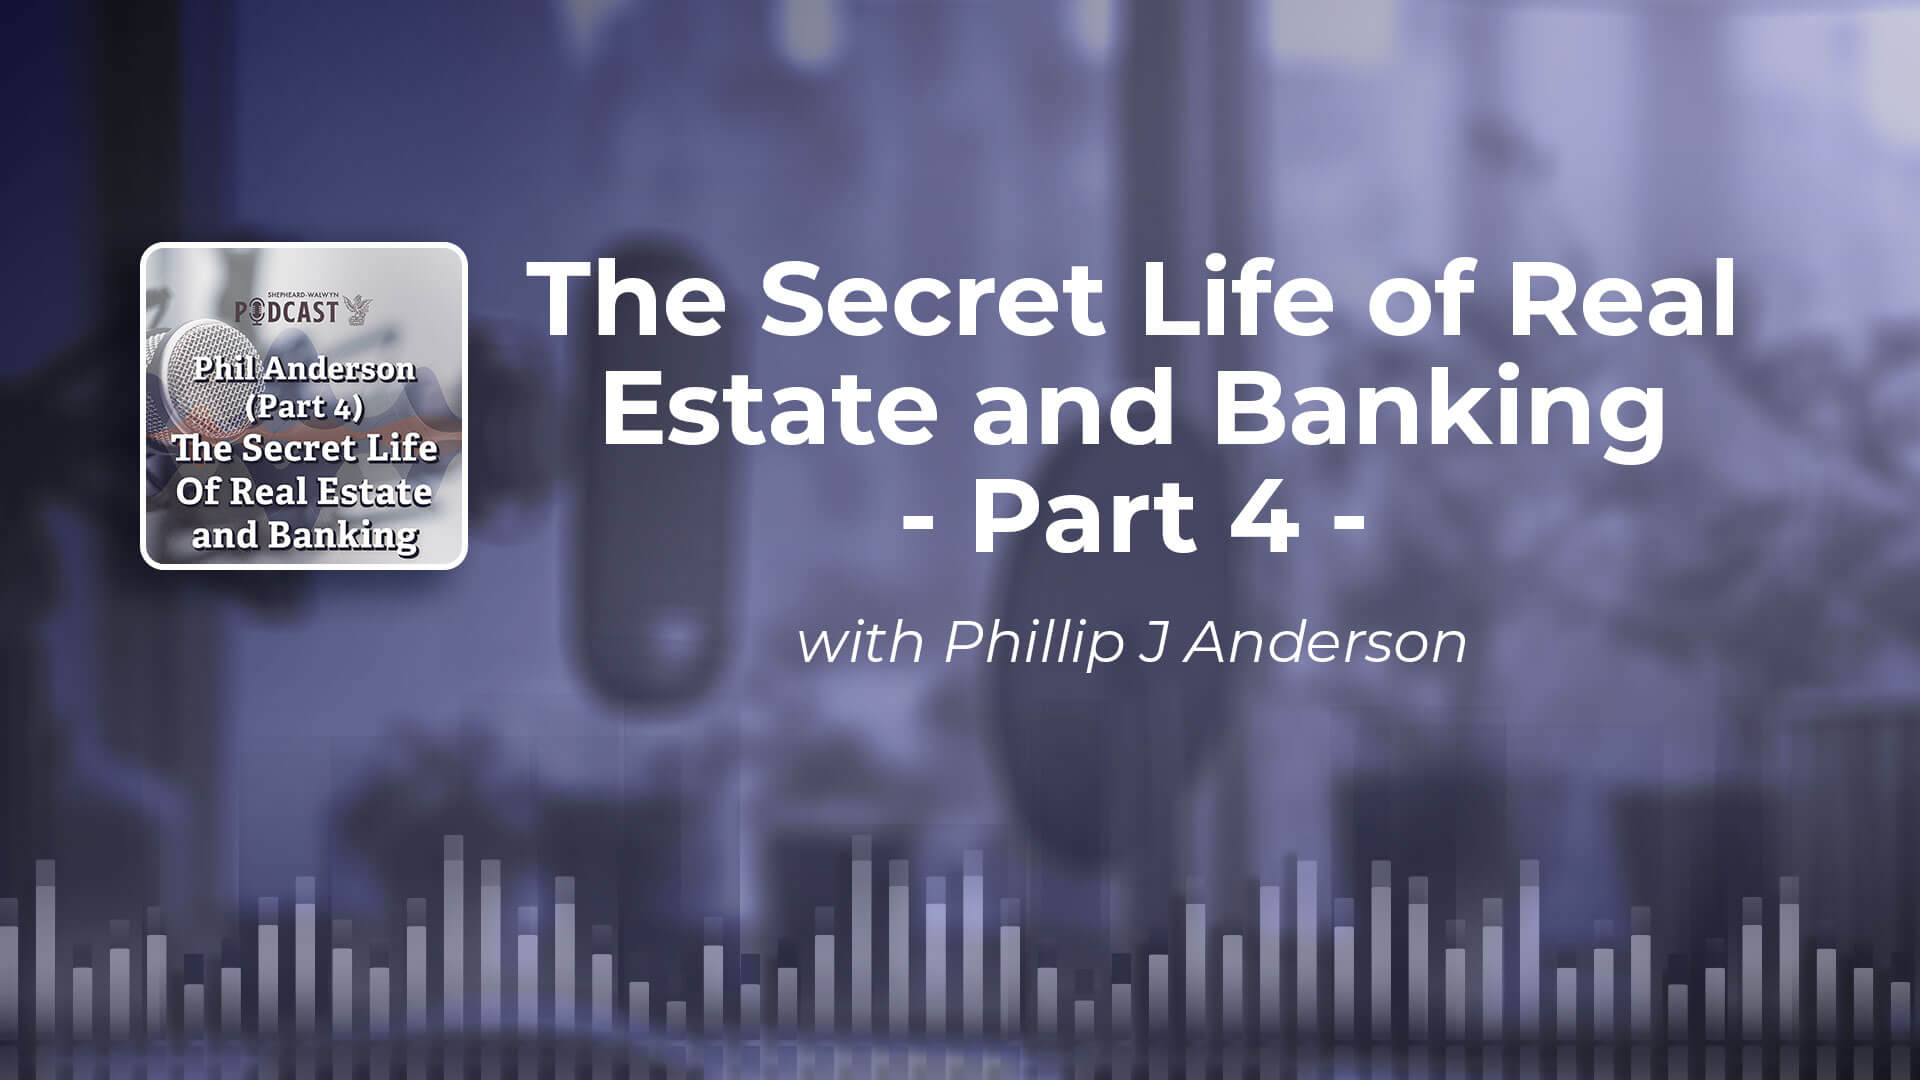 Secret Life of Banking and Real Estate - Shepheard Walwyn Podcast - Part 4